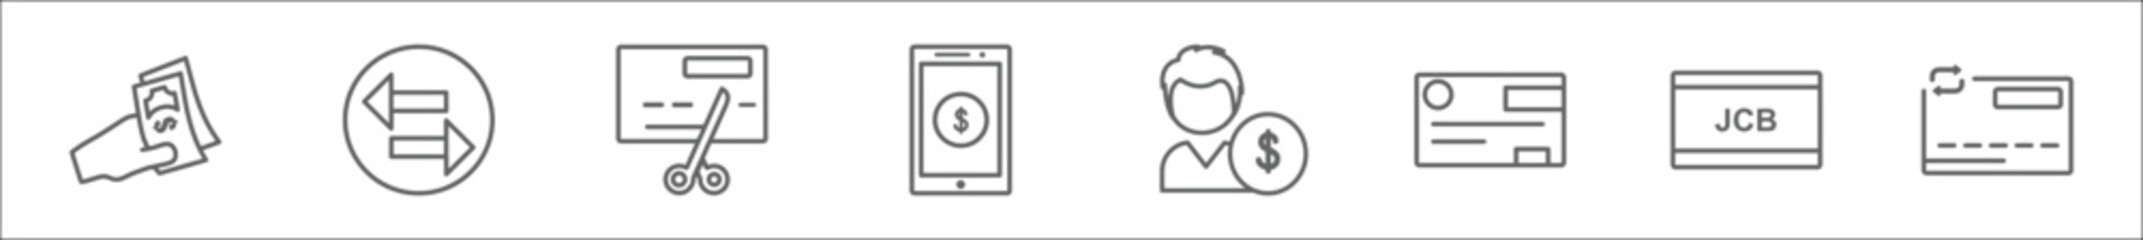 outline set of payment line icons. linear vector icons such as pay, transfer, cut card, mobile money, seller, cheque, , wirecard